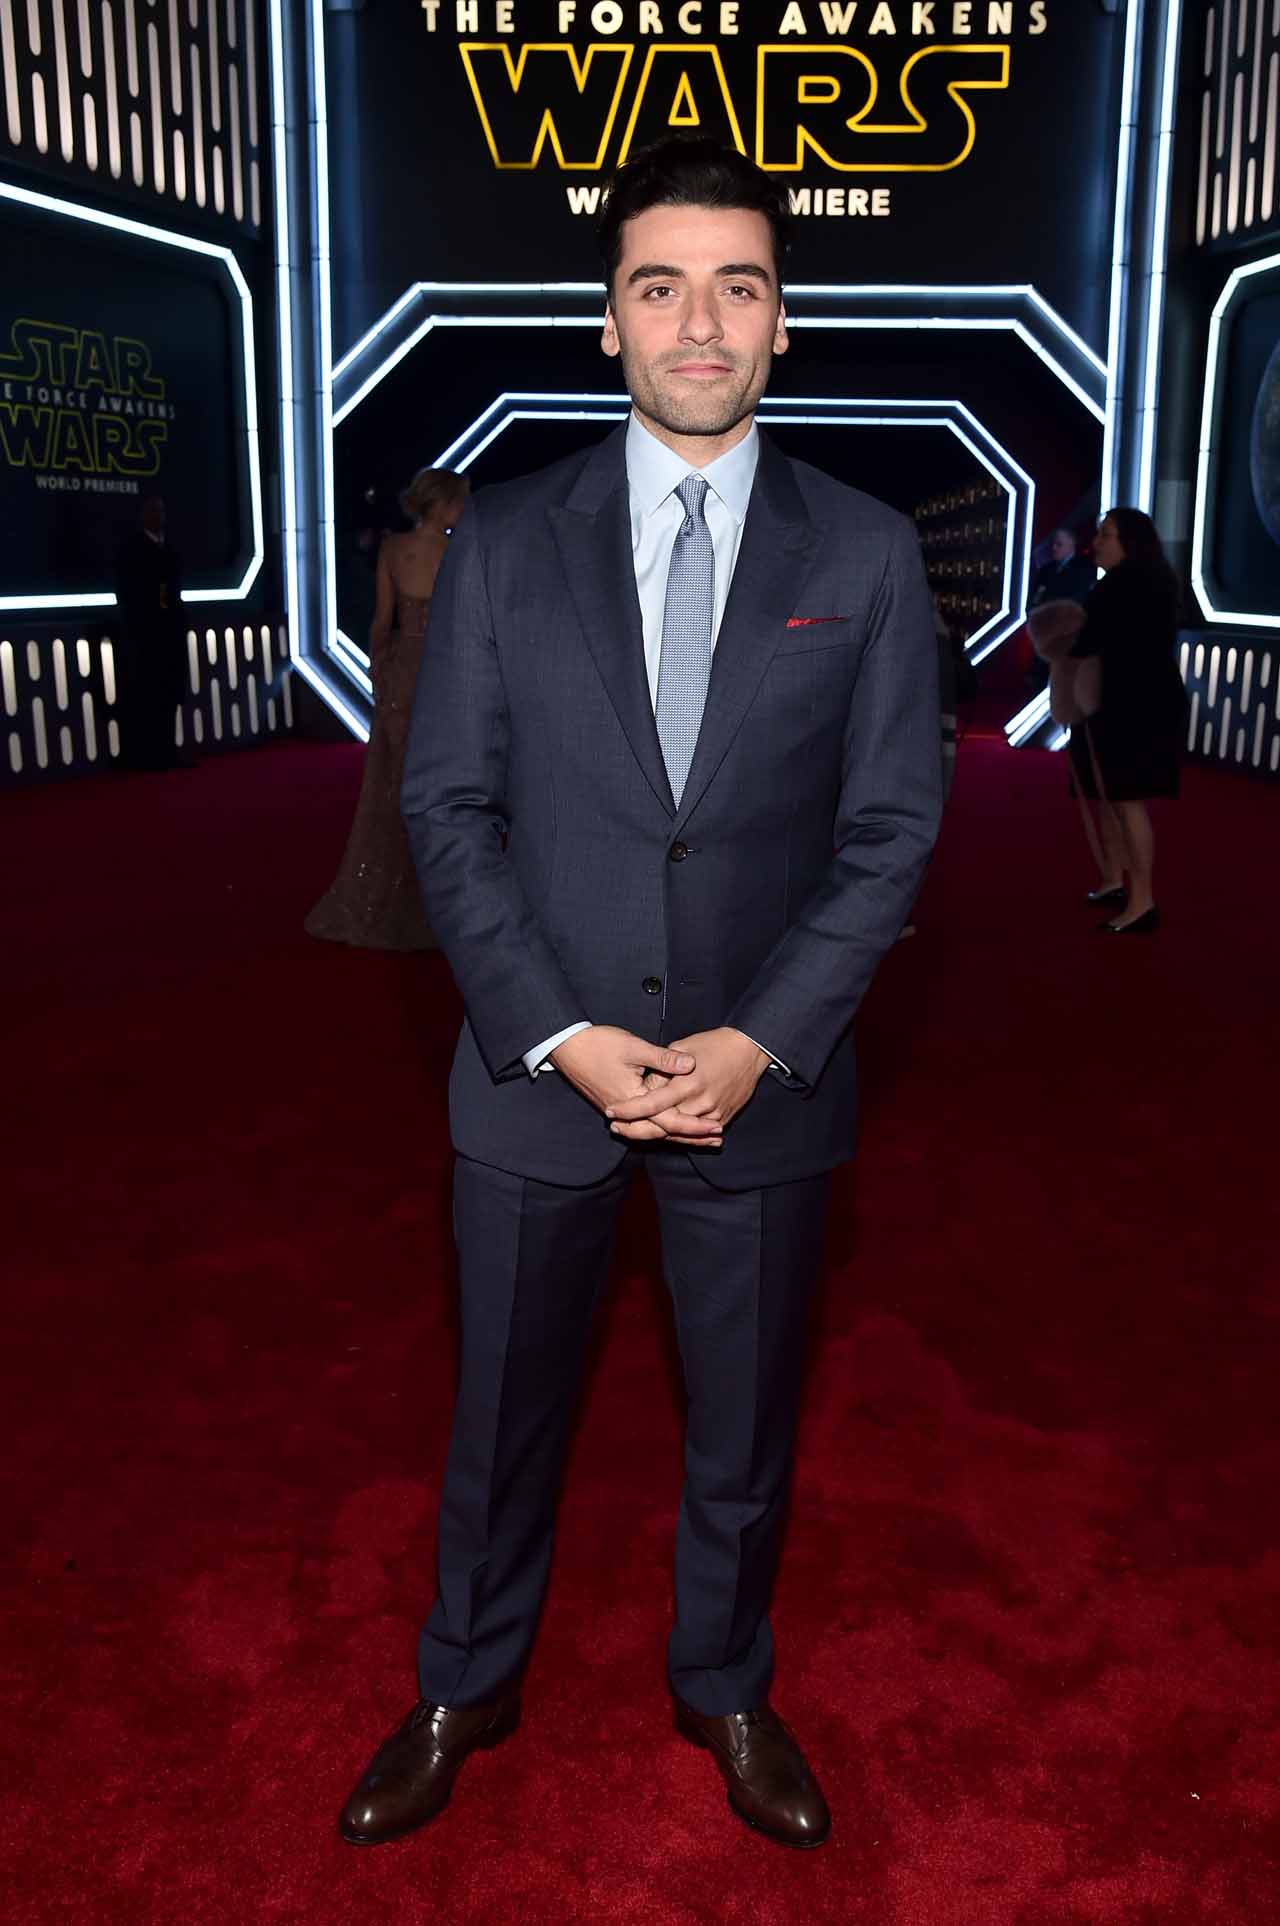 HOLLYWOOD, CA - DECEMBER 14:  Actor Oscar Isaac attends the World Premiere of ?Star Wars: The Force Awakens? at the Dolby, El Capitan, and TCL Theatres on December 14, 2015 in Hollywood, California.  (Photo by Alberto E. Rodriguez/Getty Images for Disney) *** Local Caption *** Oscar Isaac